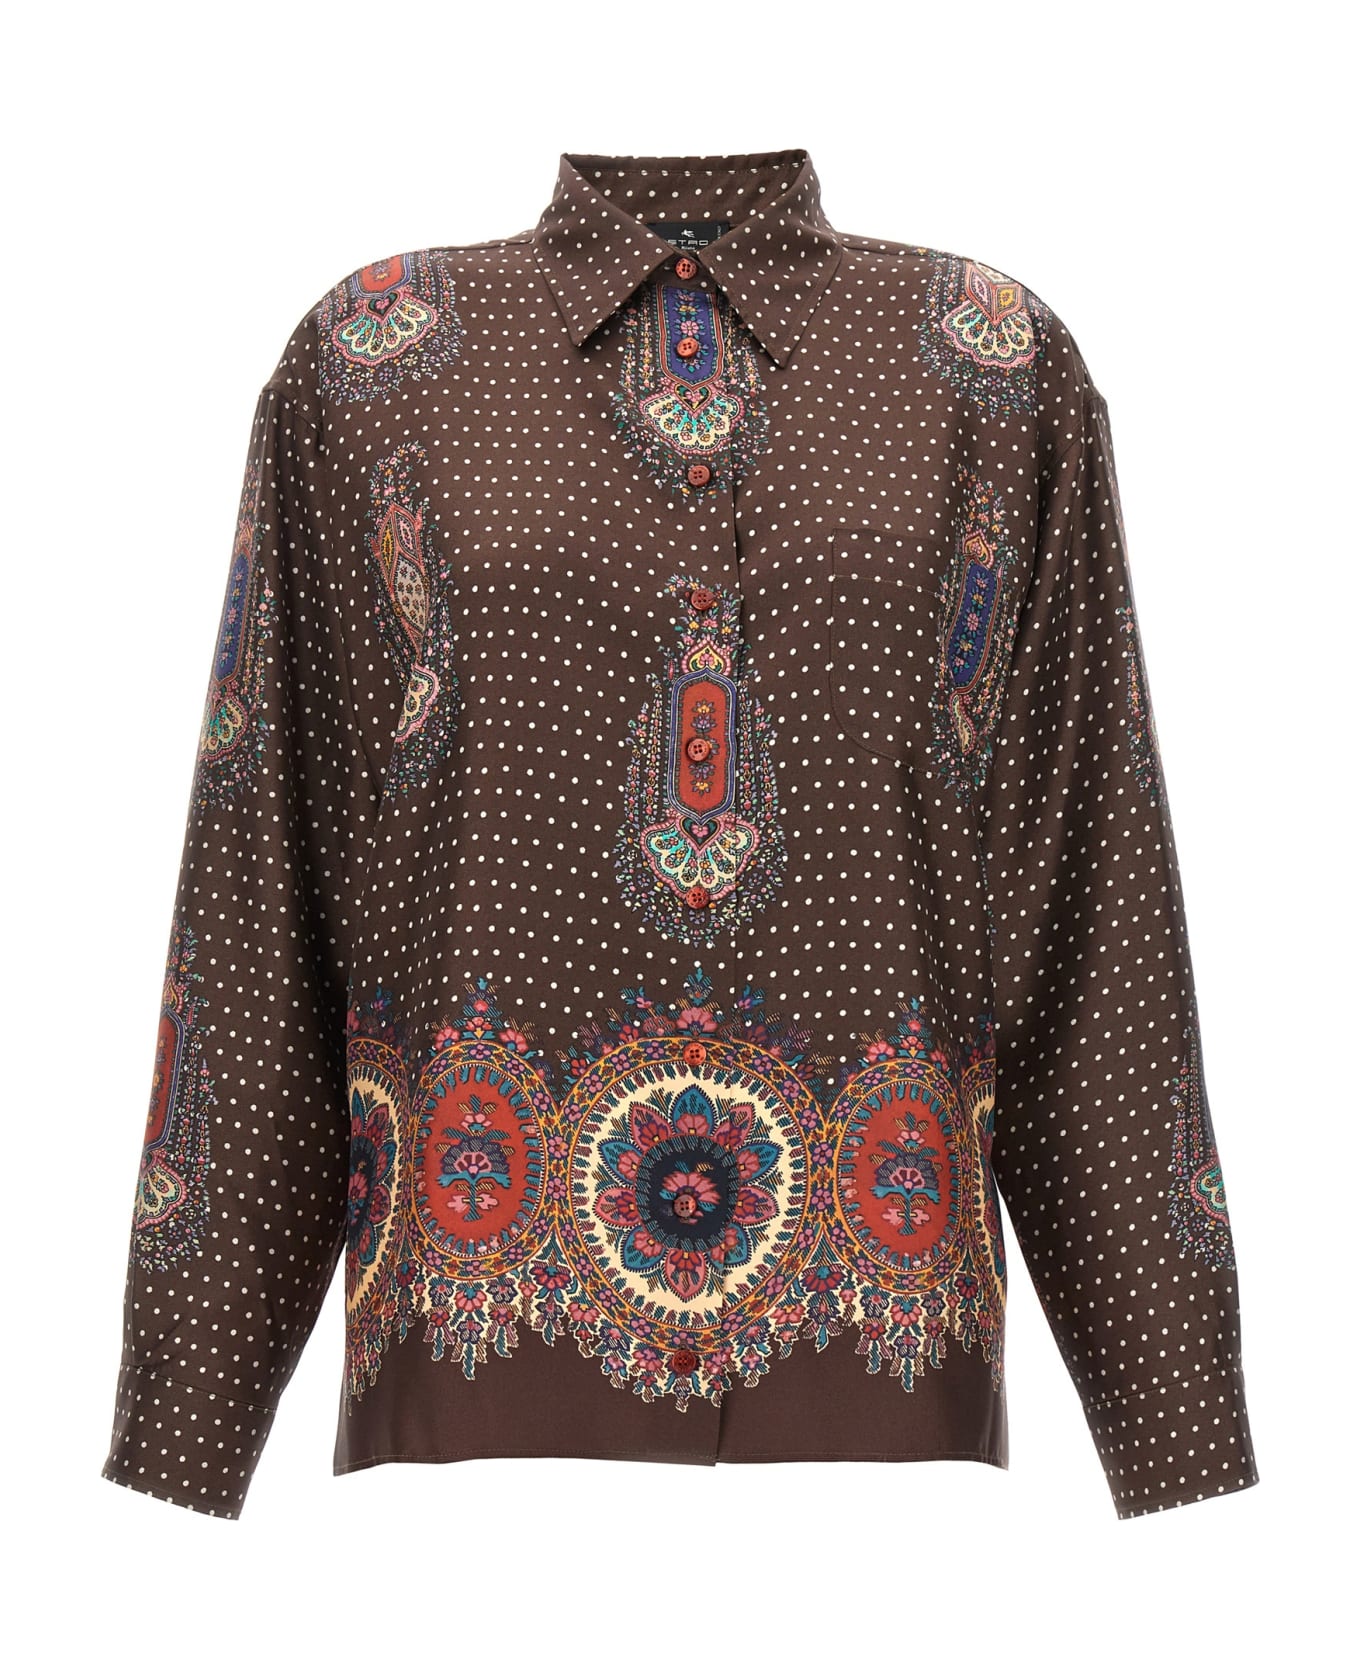 Etro All Over Print Shirt - Brown シャツ